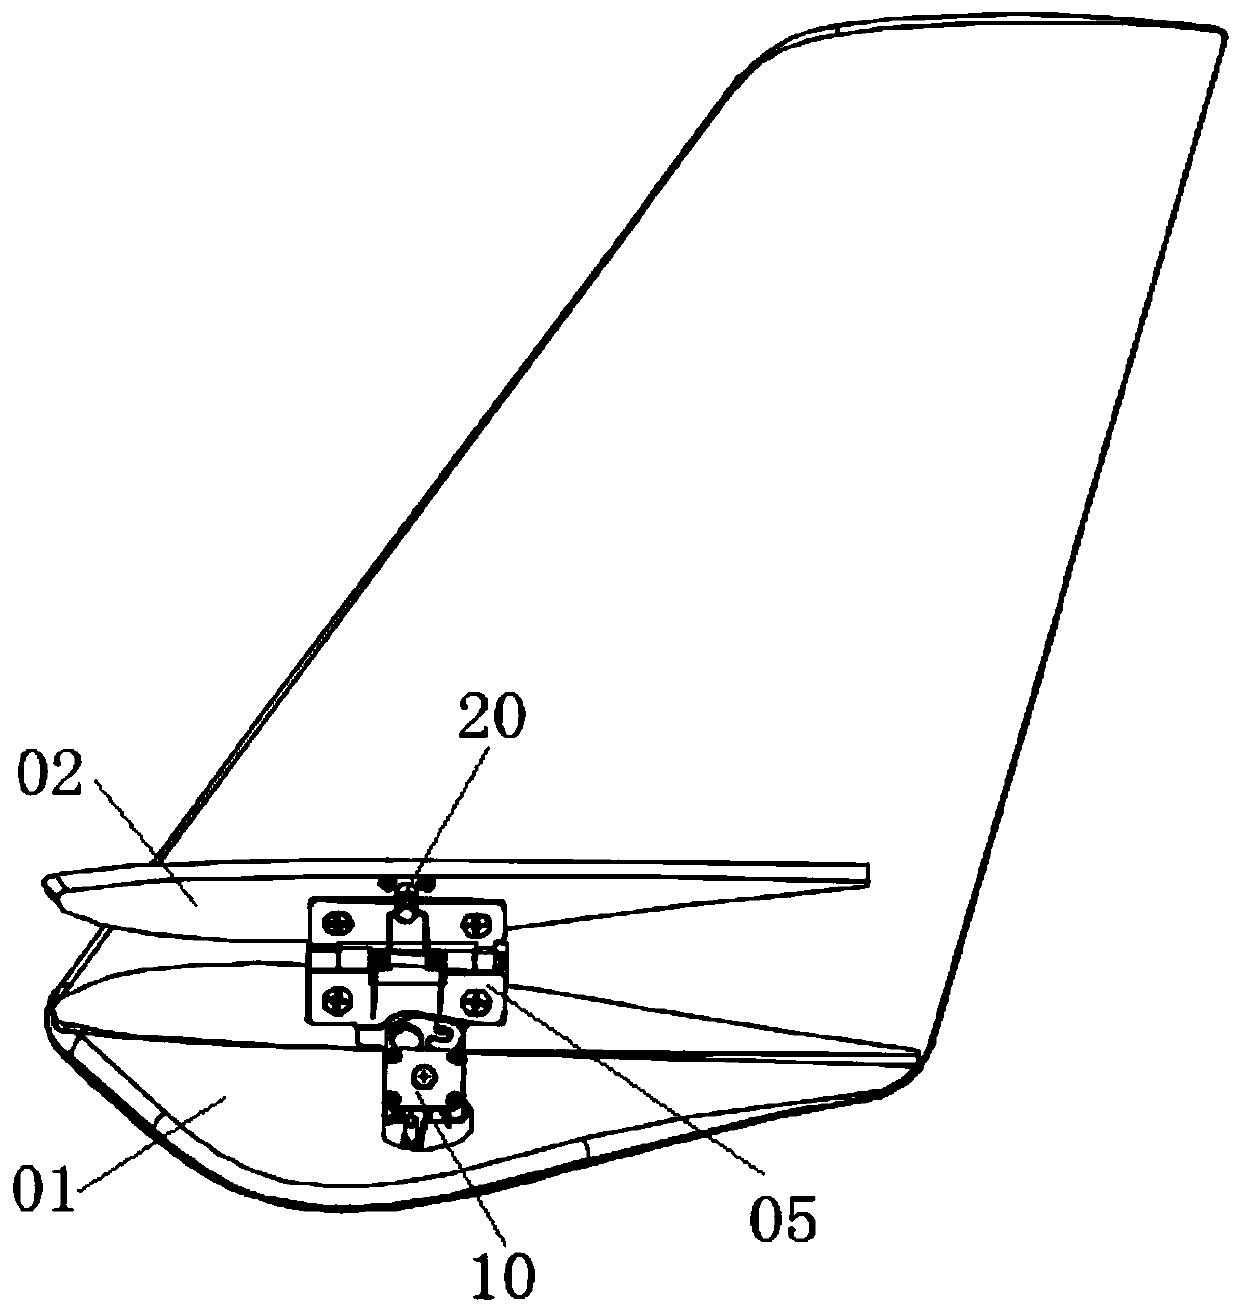 Locking structure and unmanned aerial vehicle